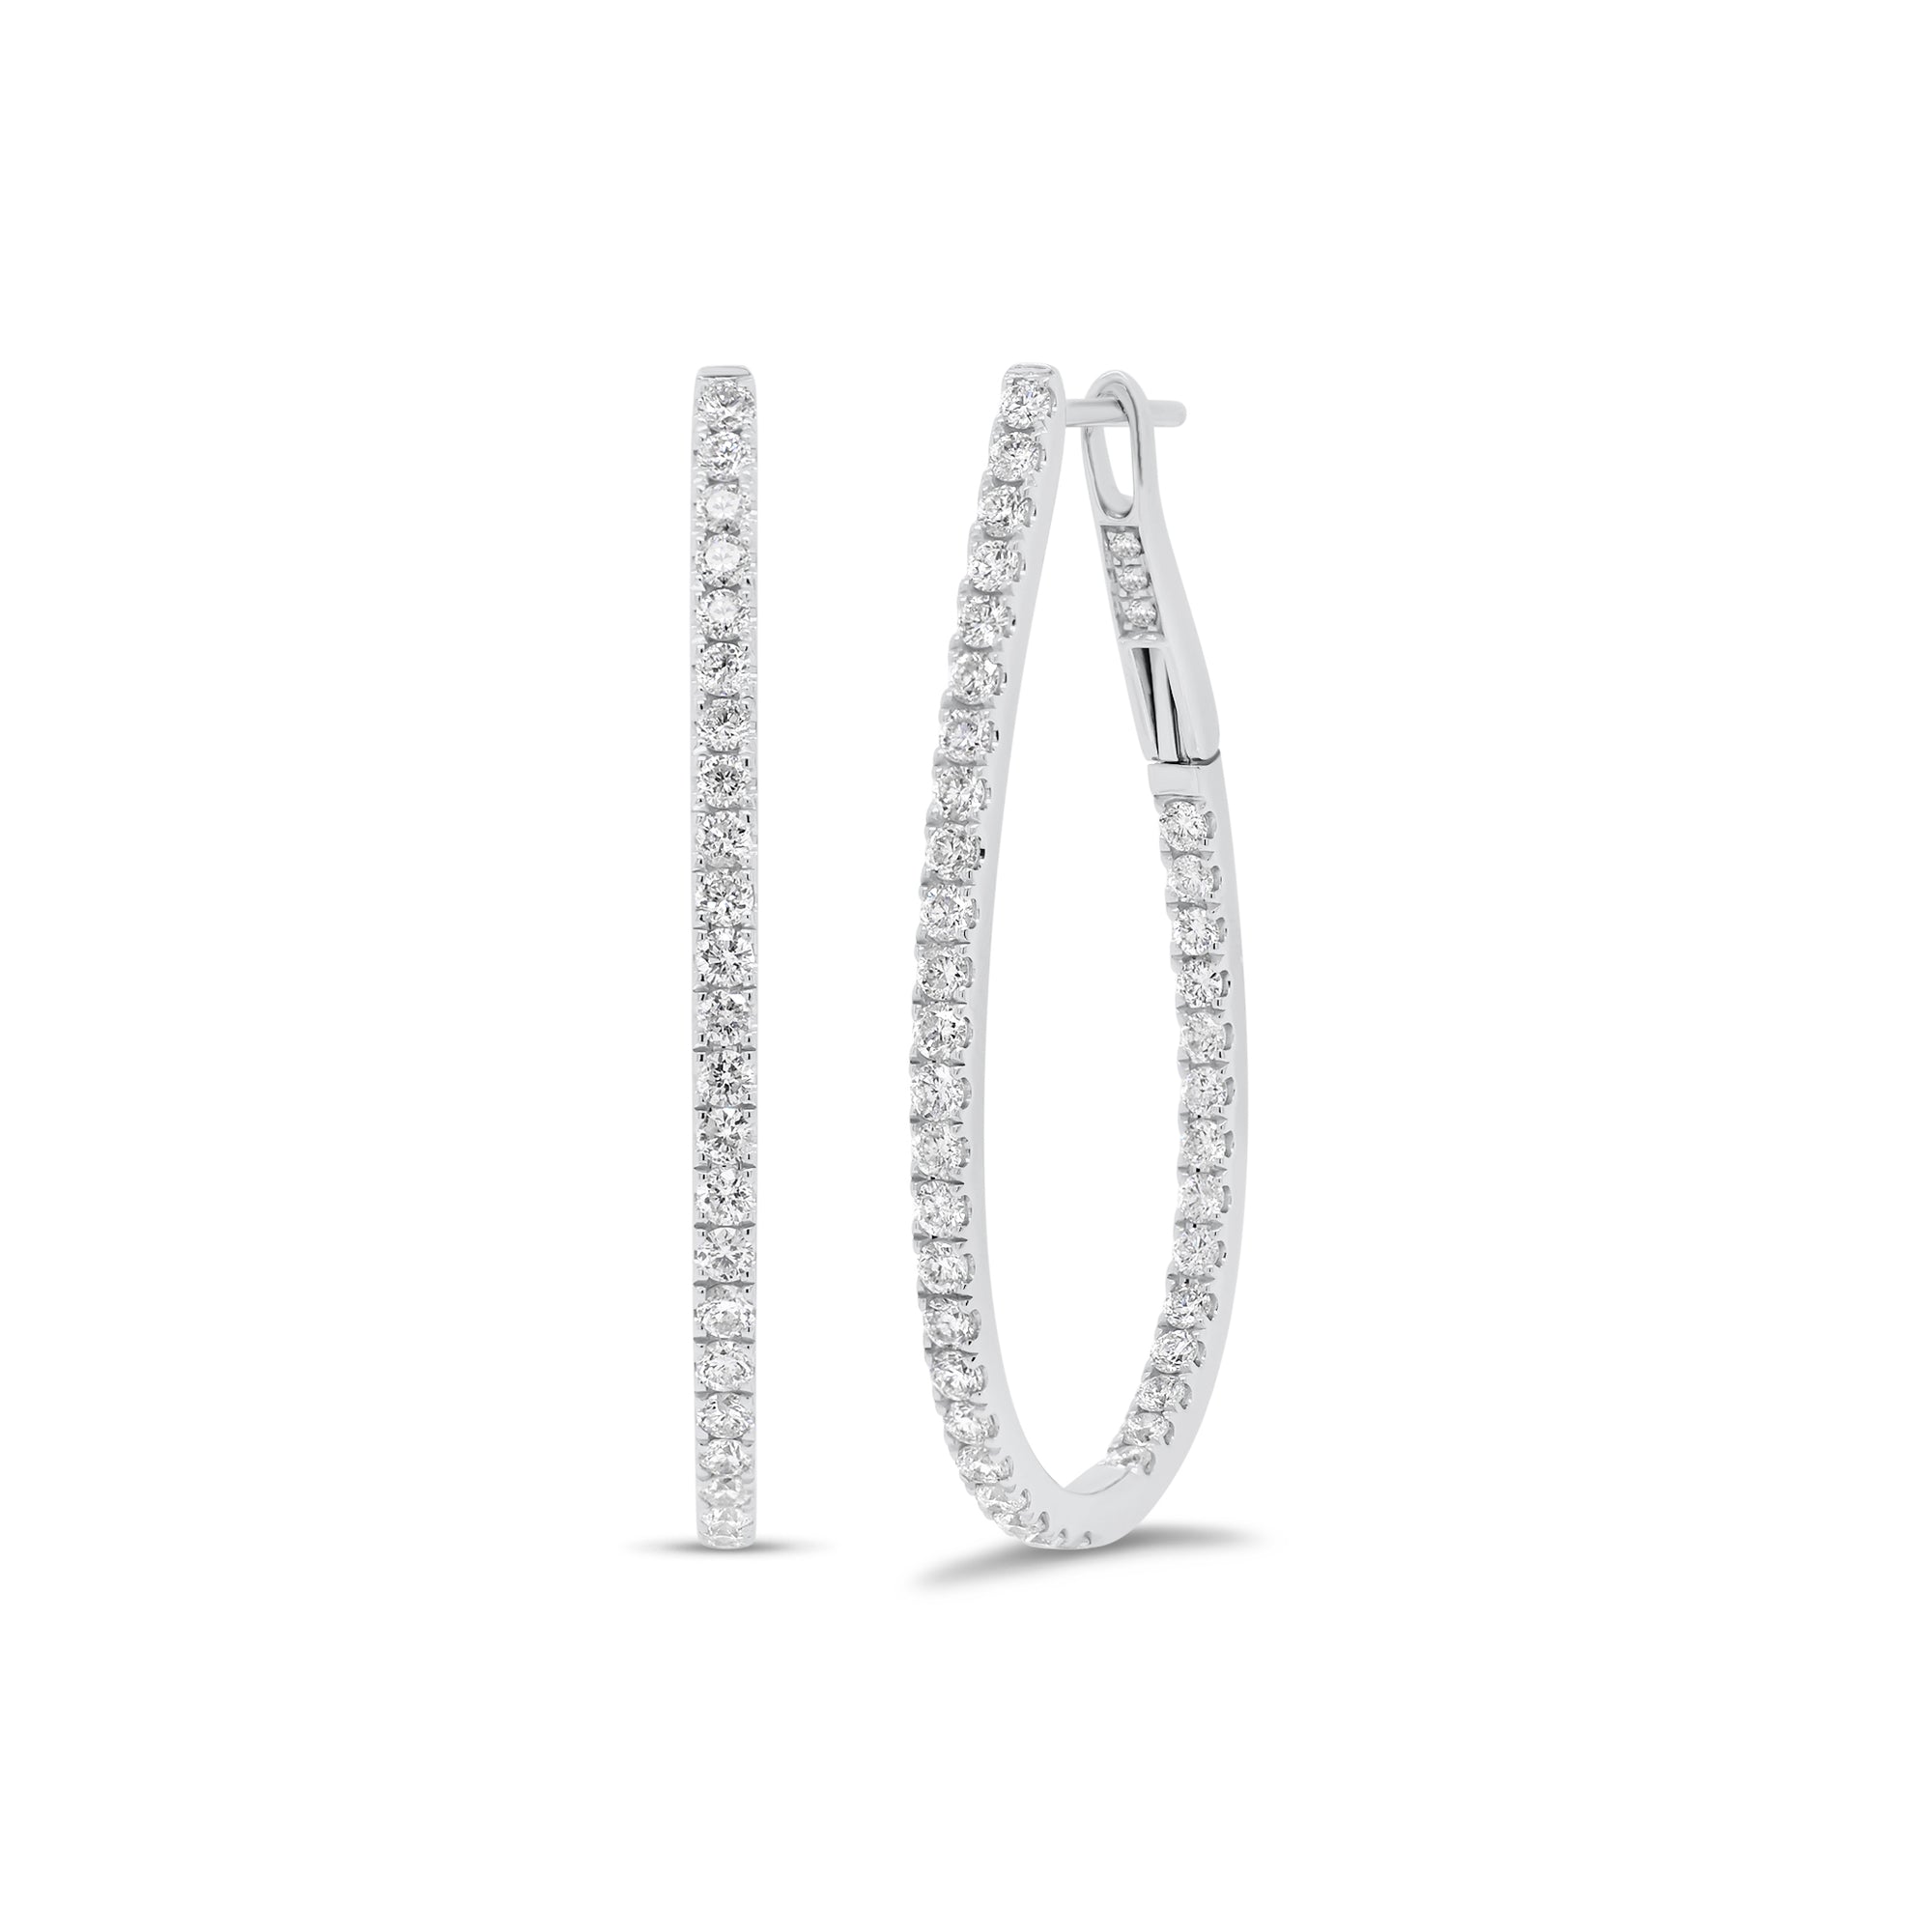 Diamond interior & exterior oval hoop earrings - 18K gold weighing 6.63 grams  - 82 round diamonds totaling 1.32 carats